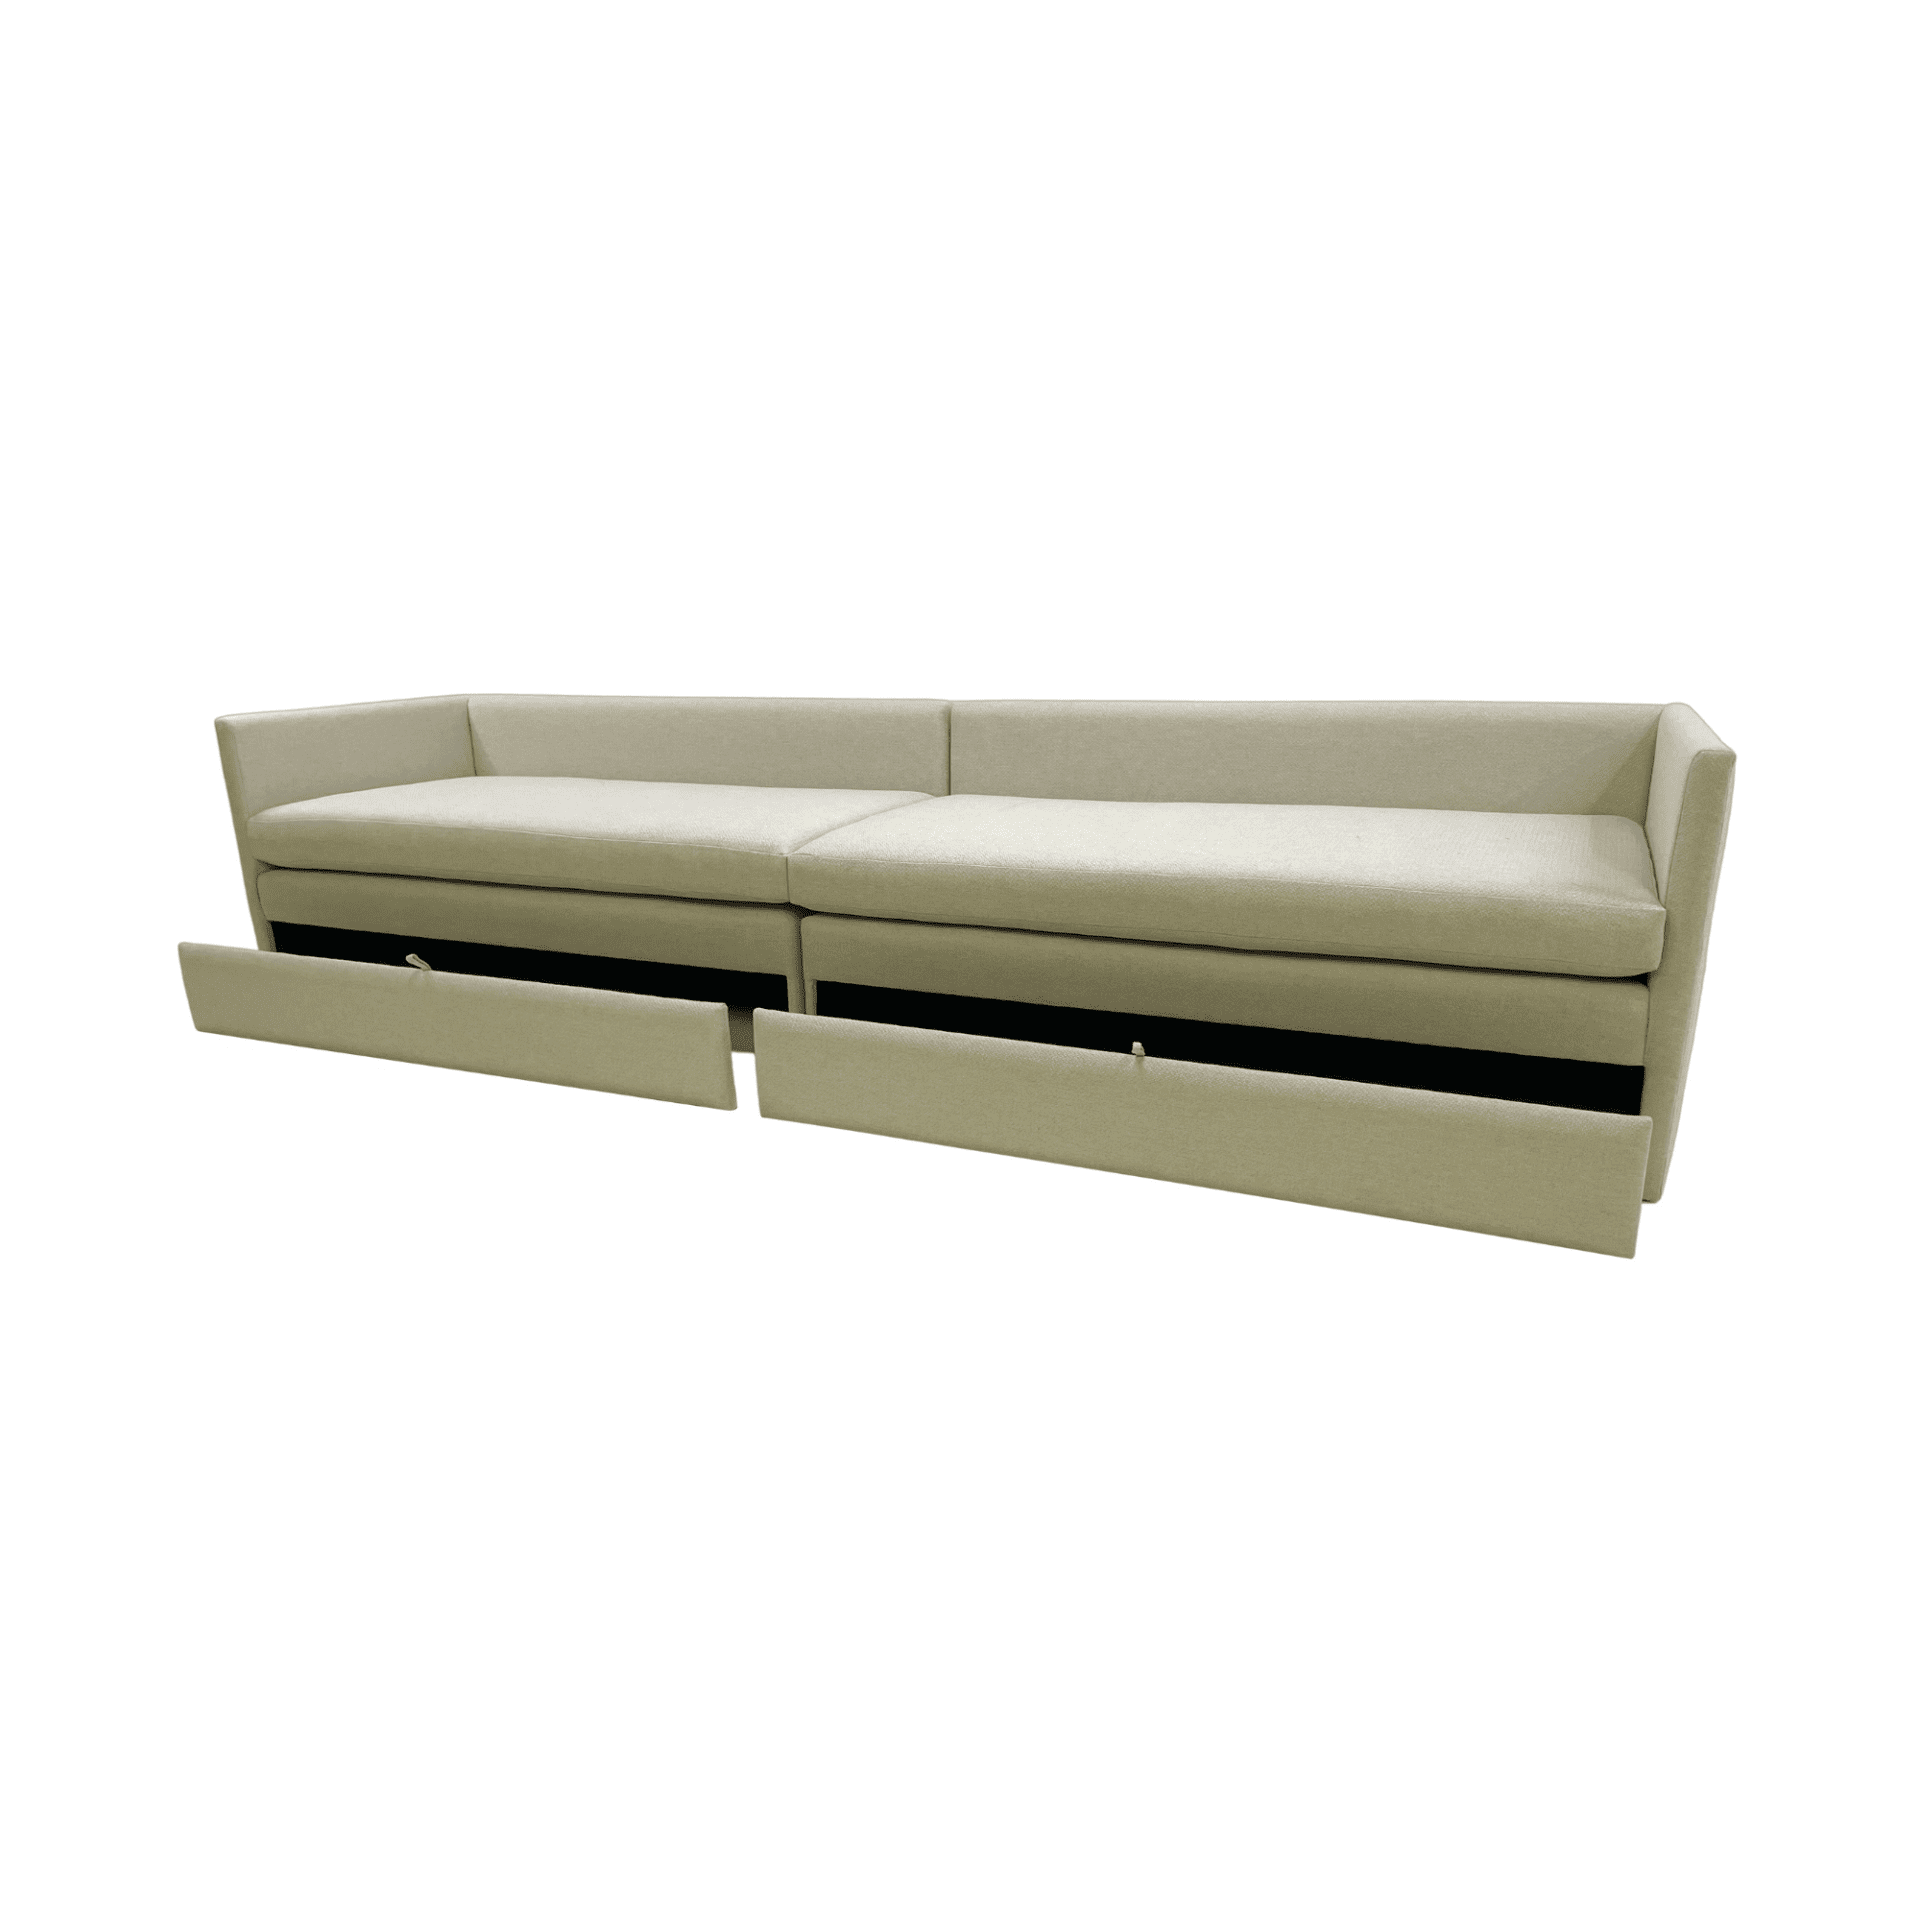 NAPLES Upholstered Daybed, Luxury Furniture - Blend Home Furnishings